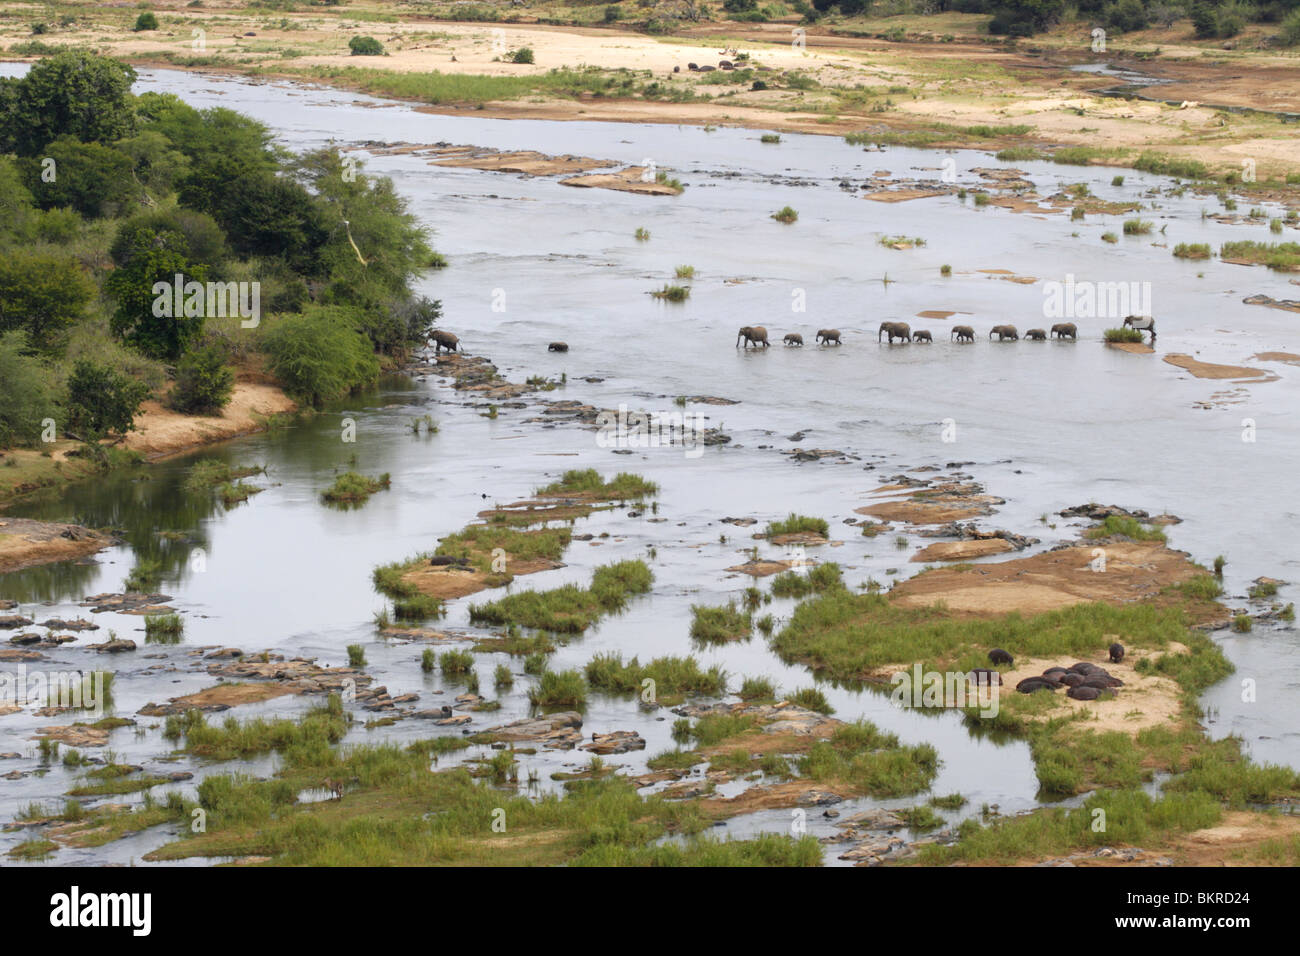 African Elephants in the Olifants River of South Africa Stock Photo